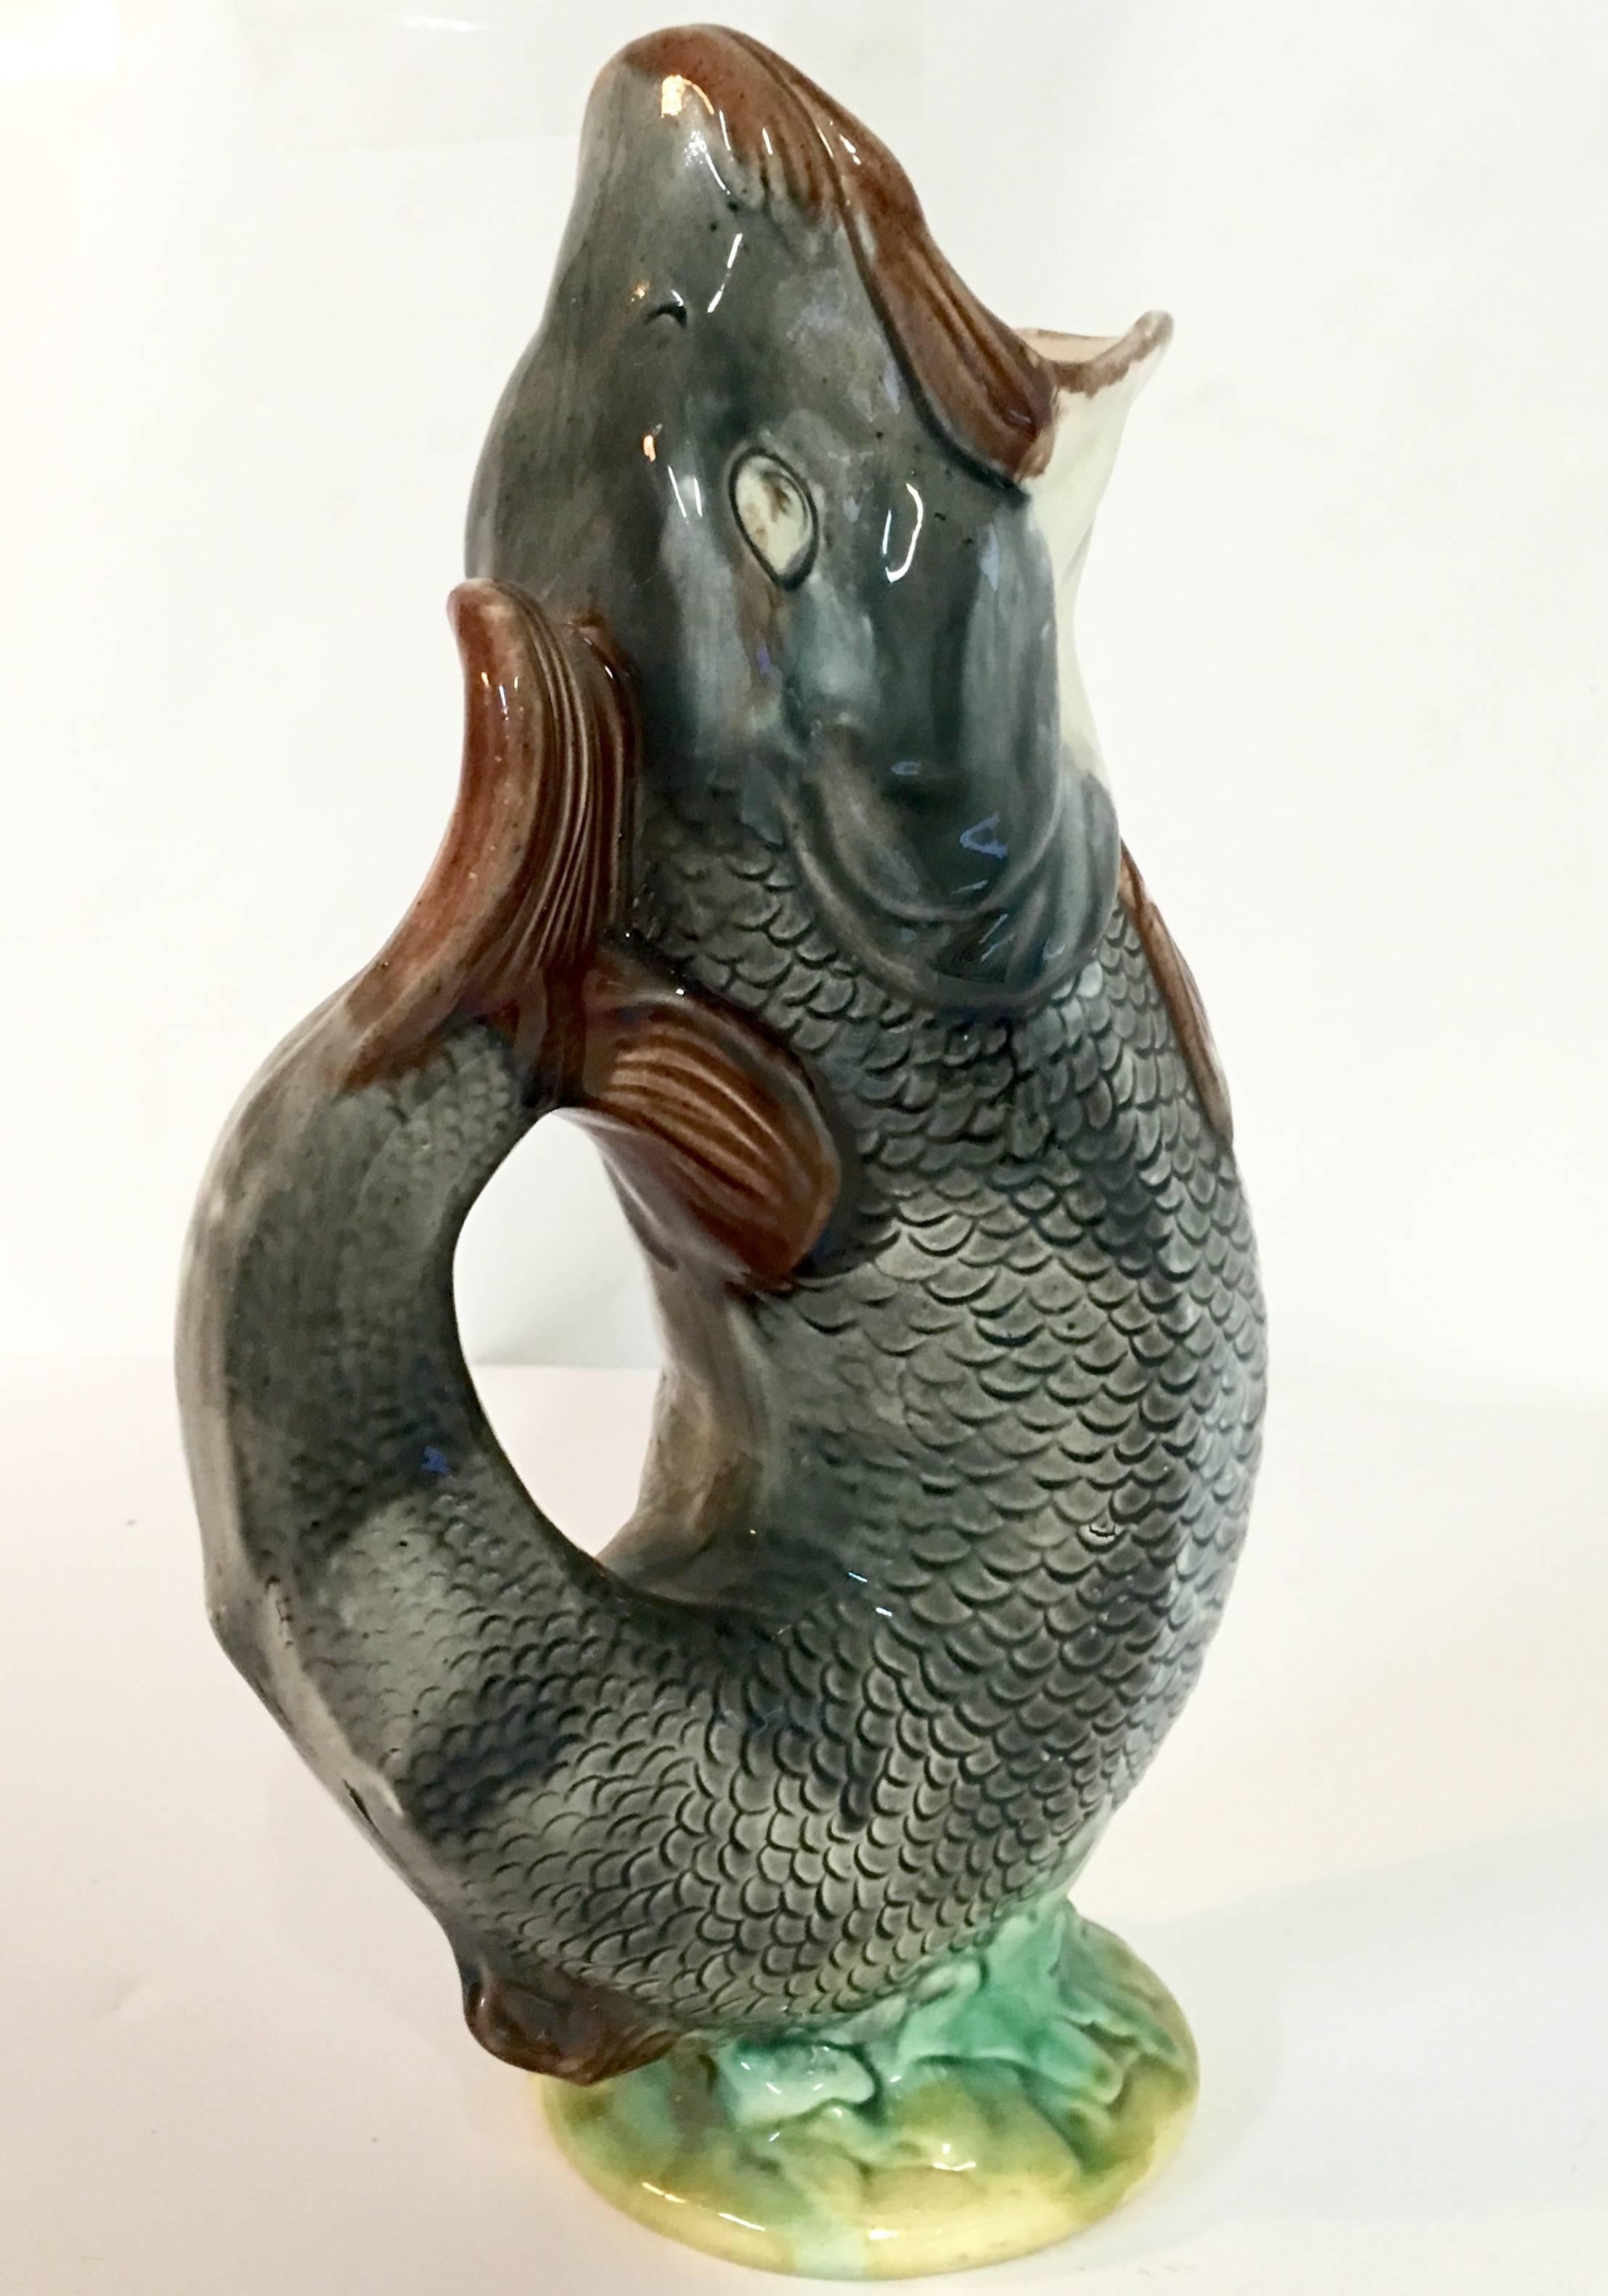 Late 19th century antique majolica gurgling fish serving pitcher. This rare charcoal scales and pink throat with multi green base colored pitcher is in pristine condition for its age. Signed on underside.